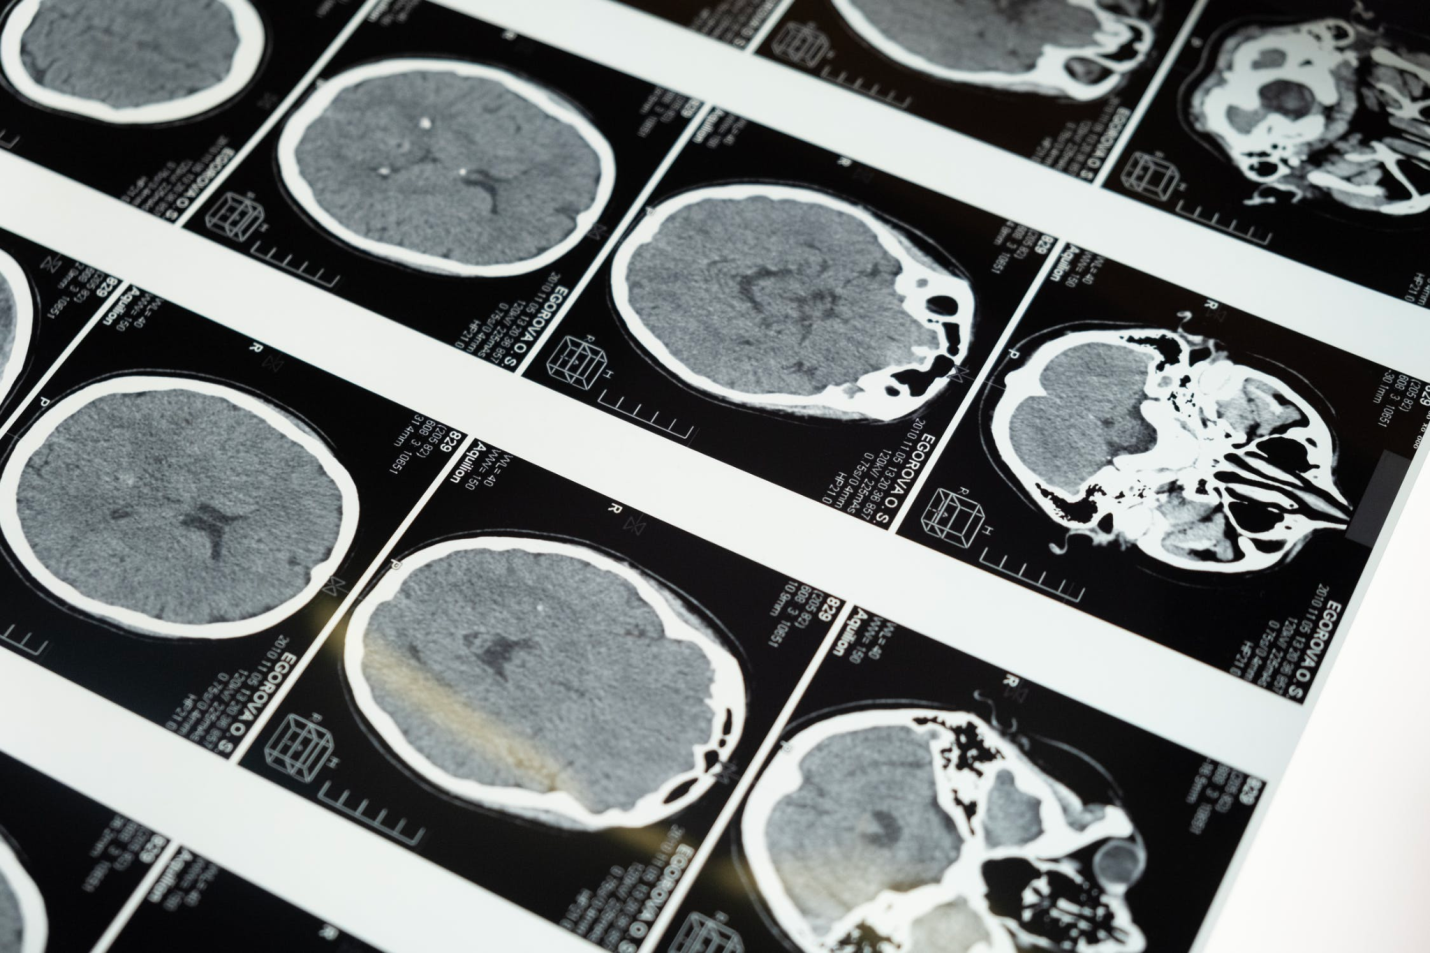 A sheet showing MRI scans of a patient’s brain.